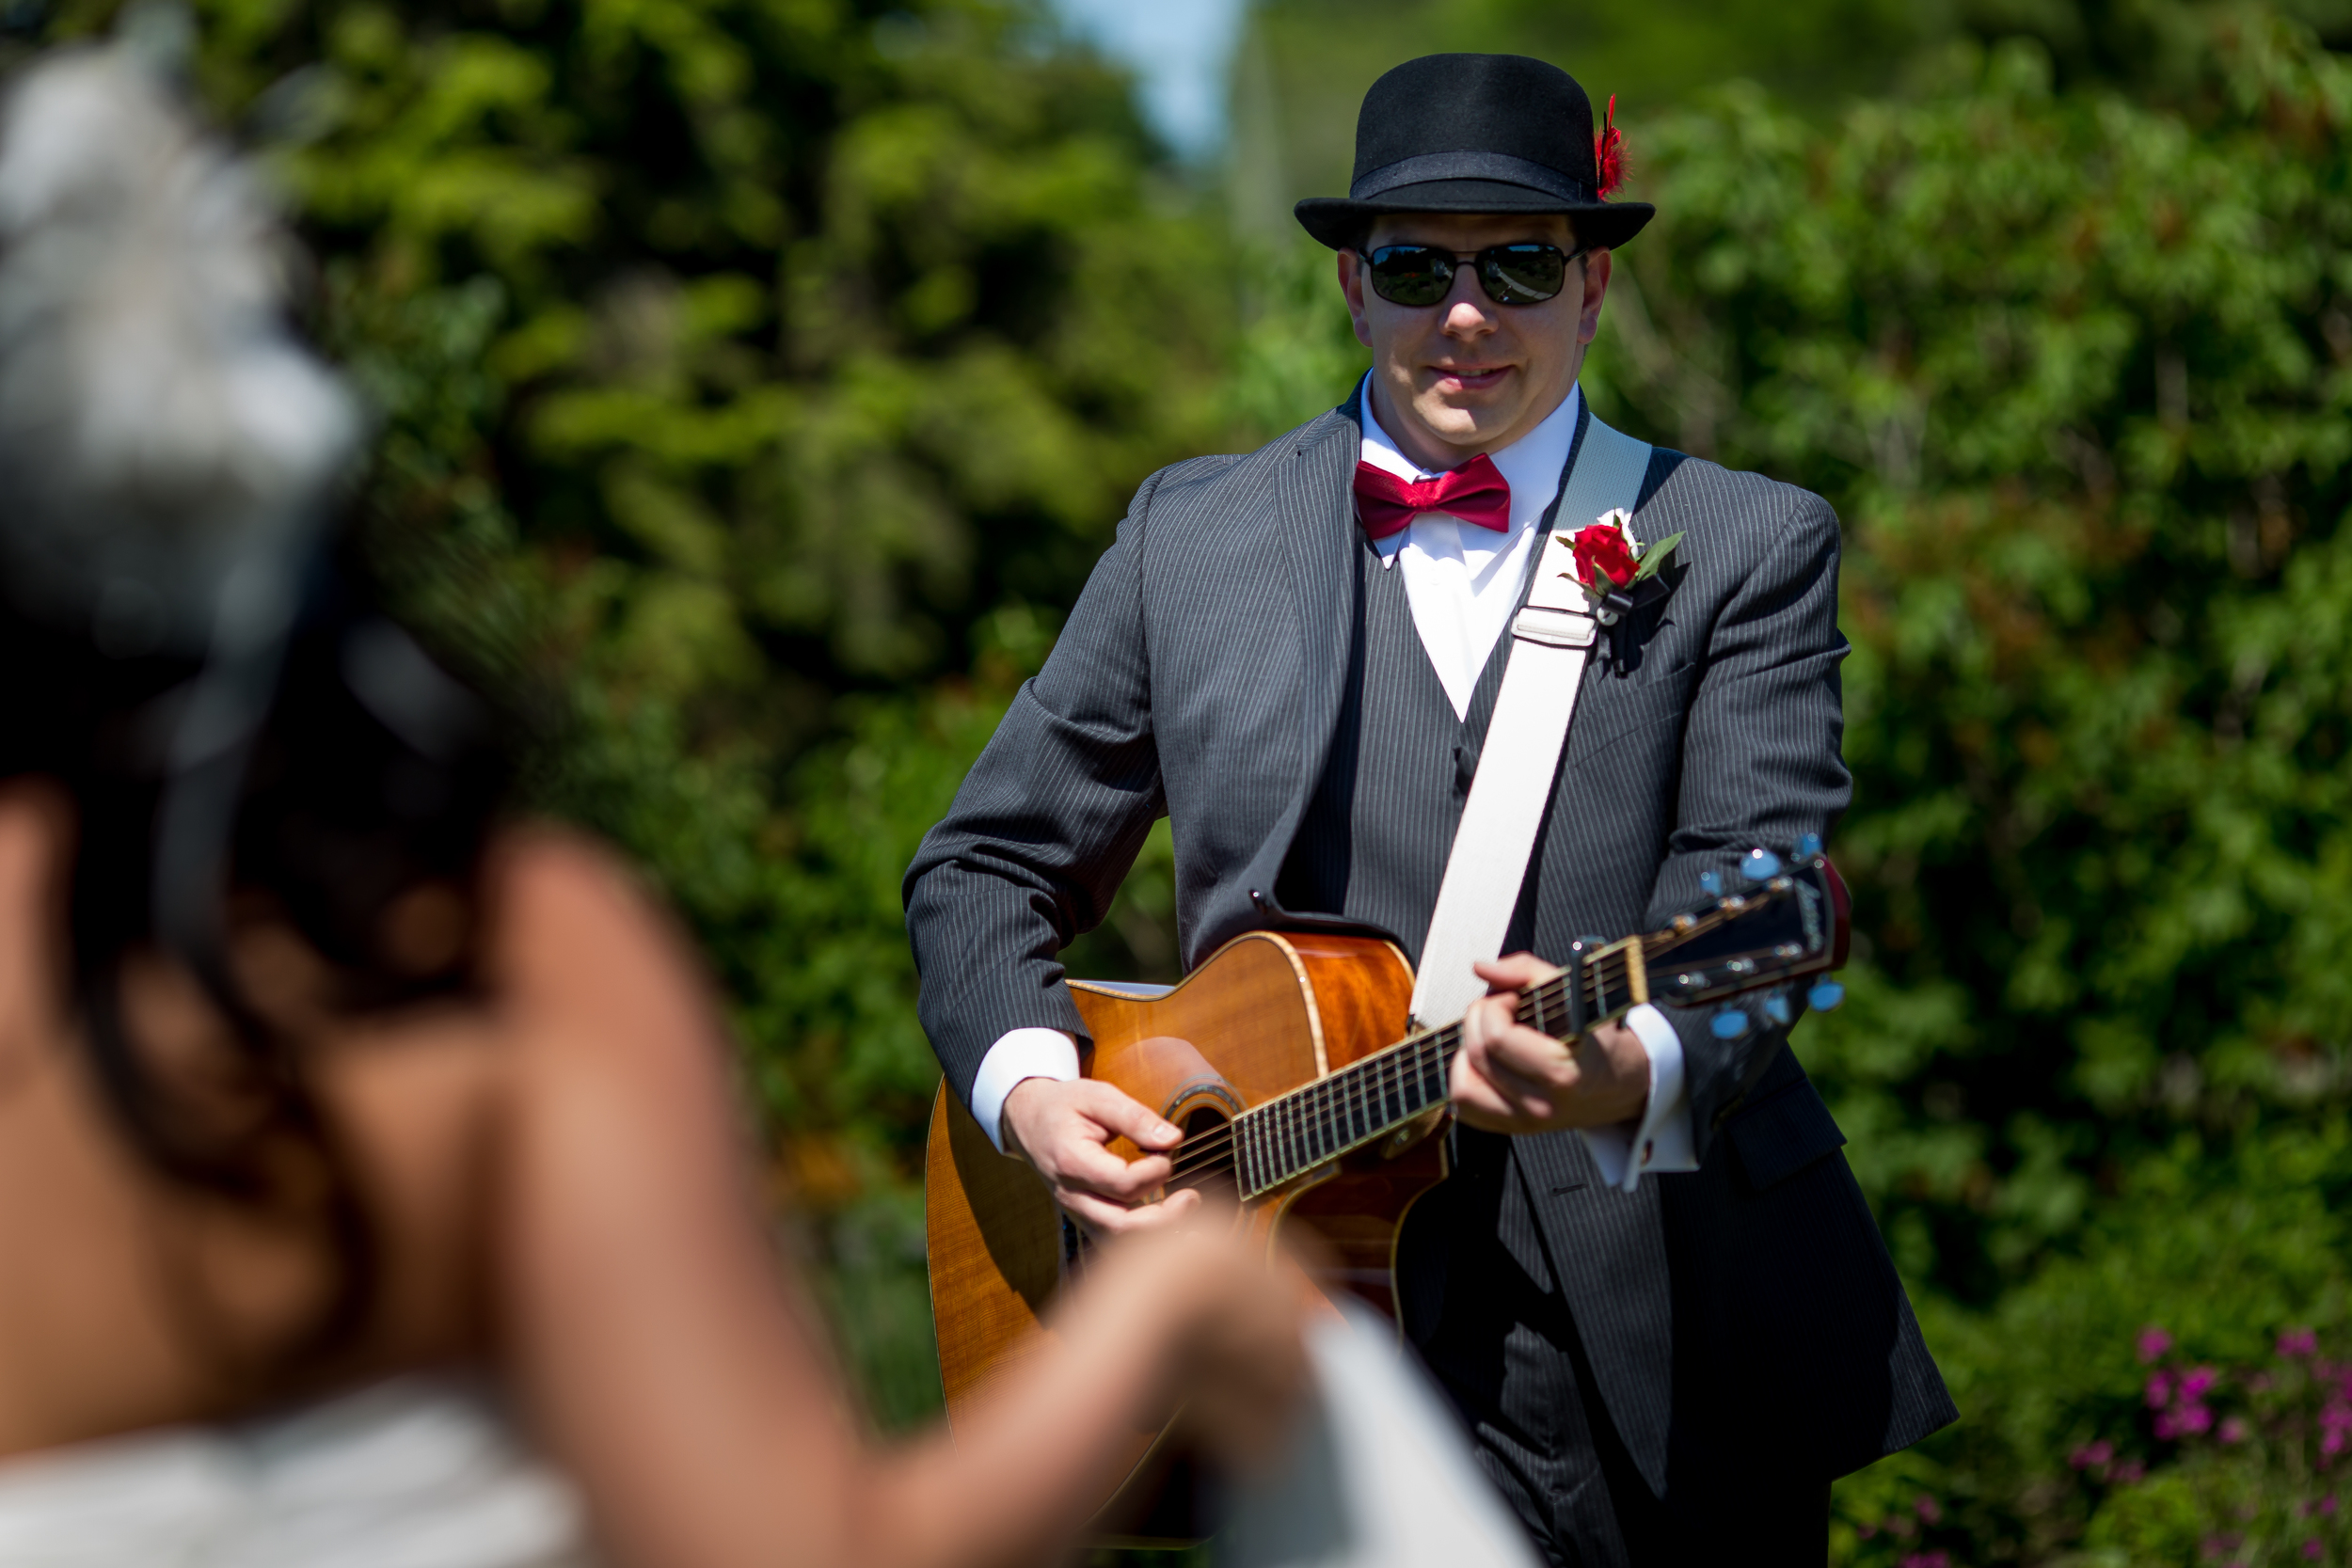 The groom playing the guitar for his bride